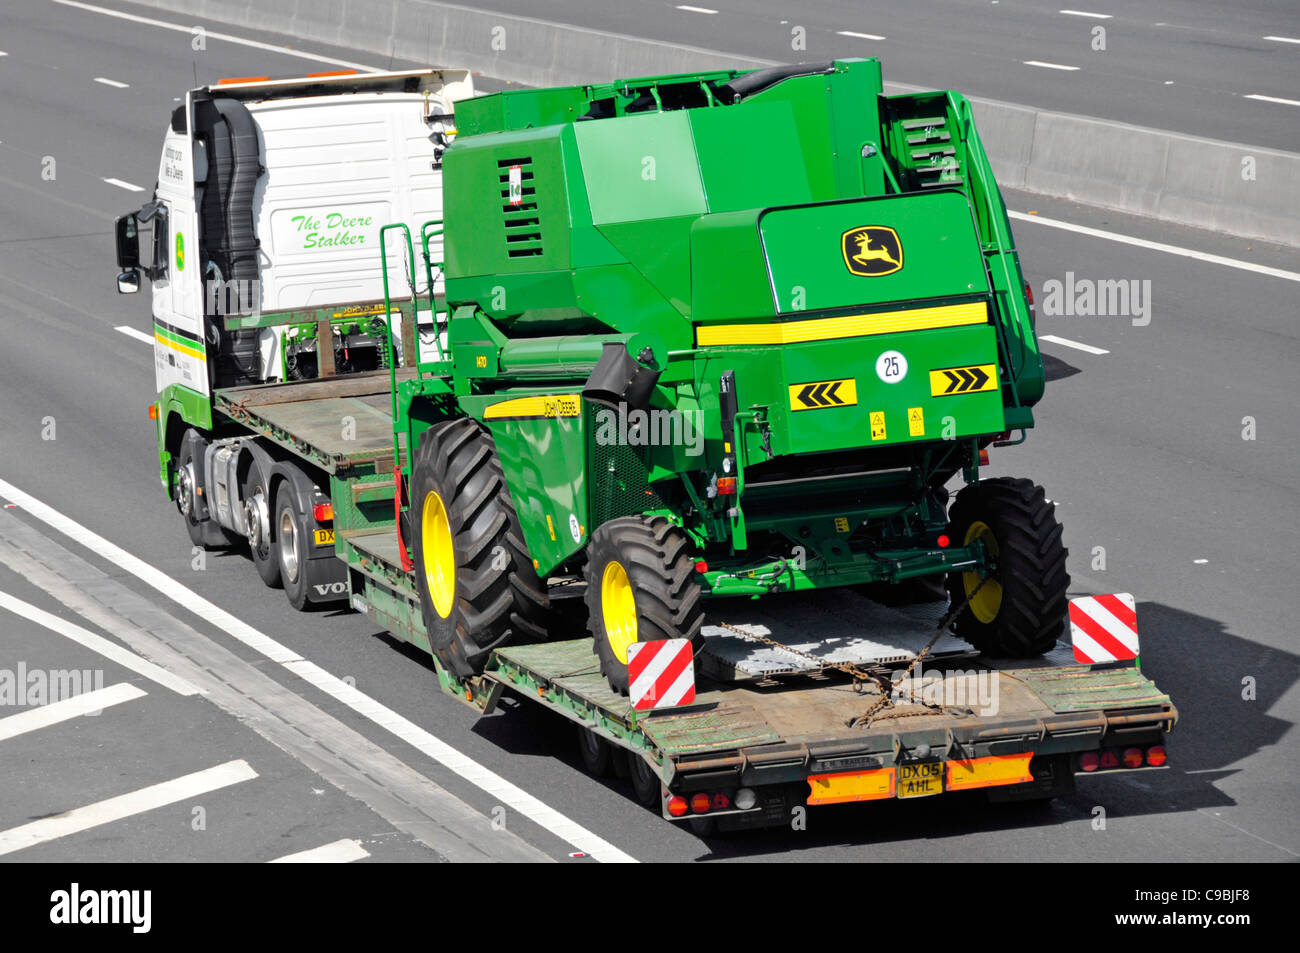 Farm machinery product by John Deere hgv lorry and articulated low loader transporting a John Deere combine harvester machine motorway Essex England Stock Photo